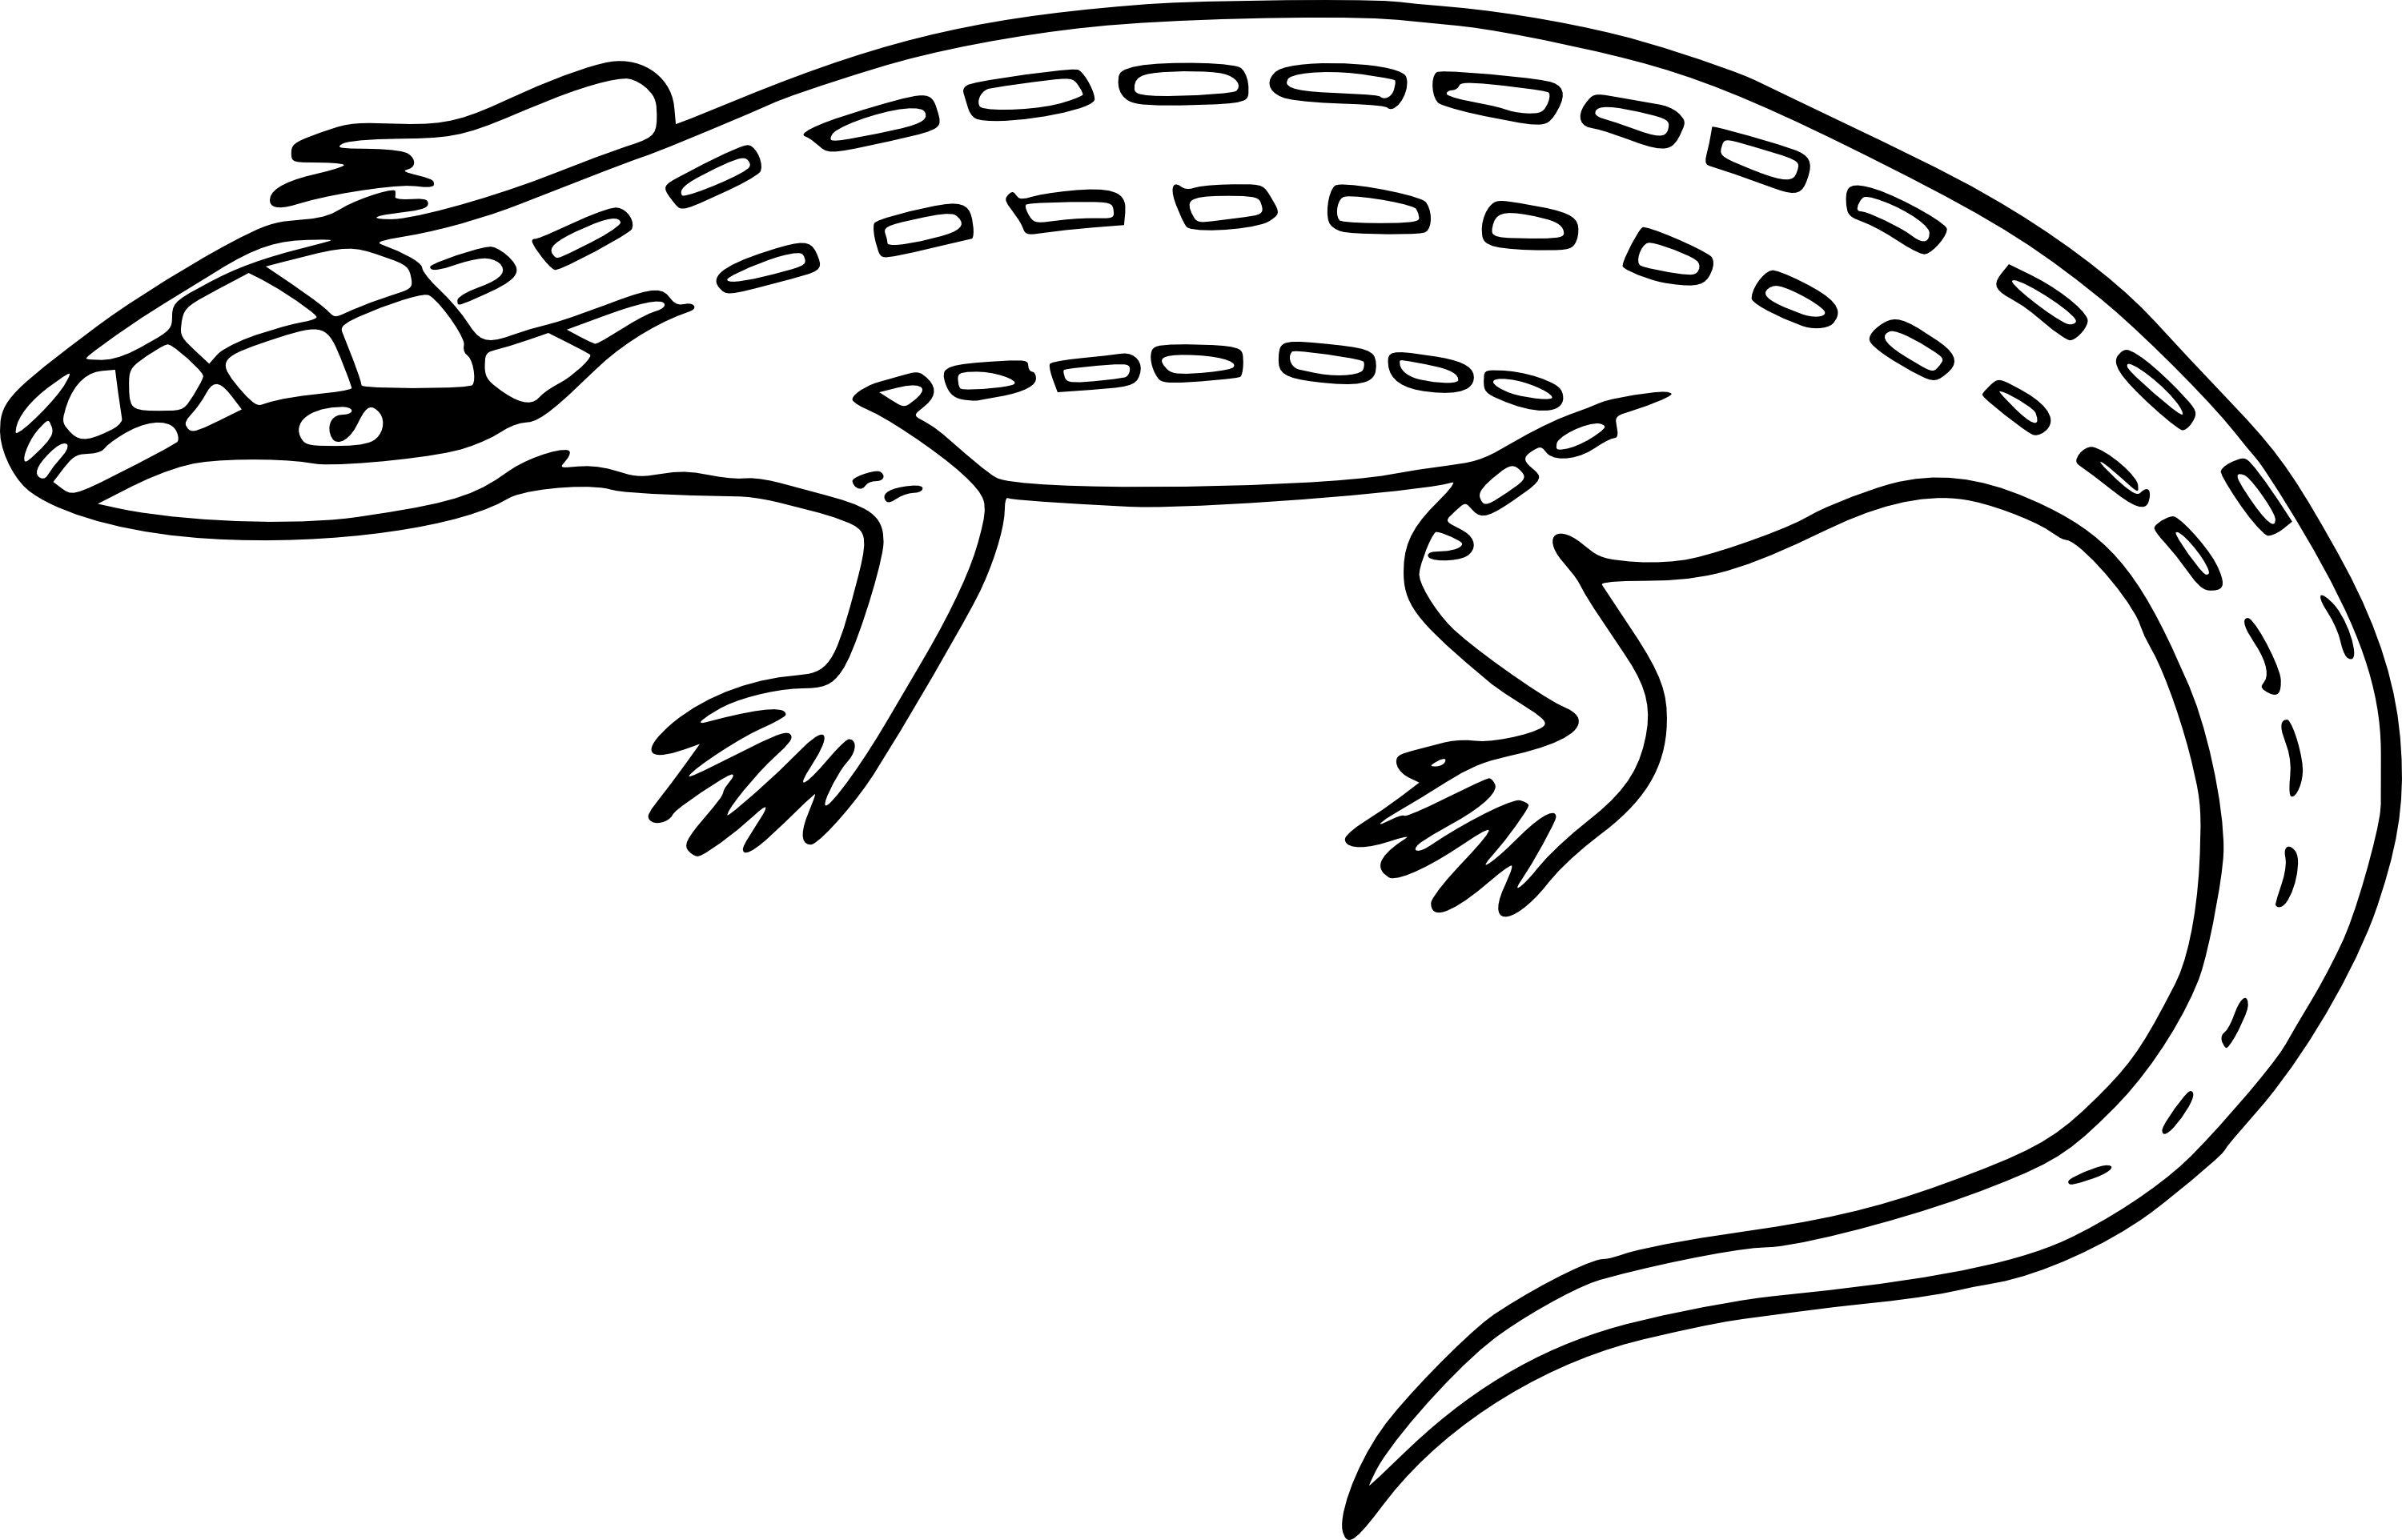 Lizard drawing and coloring page